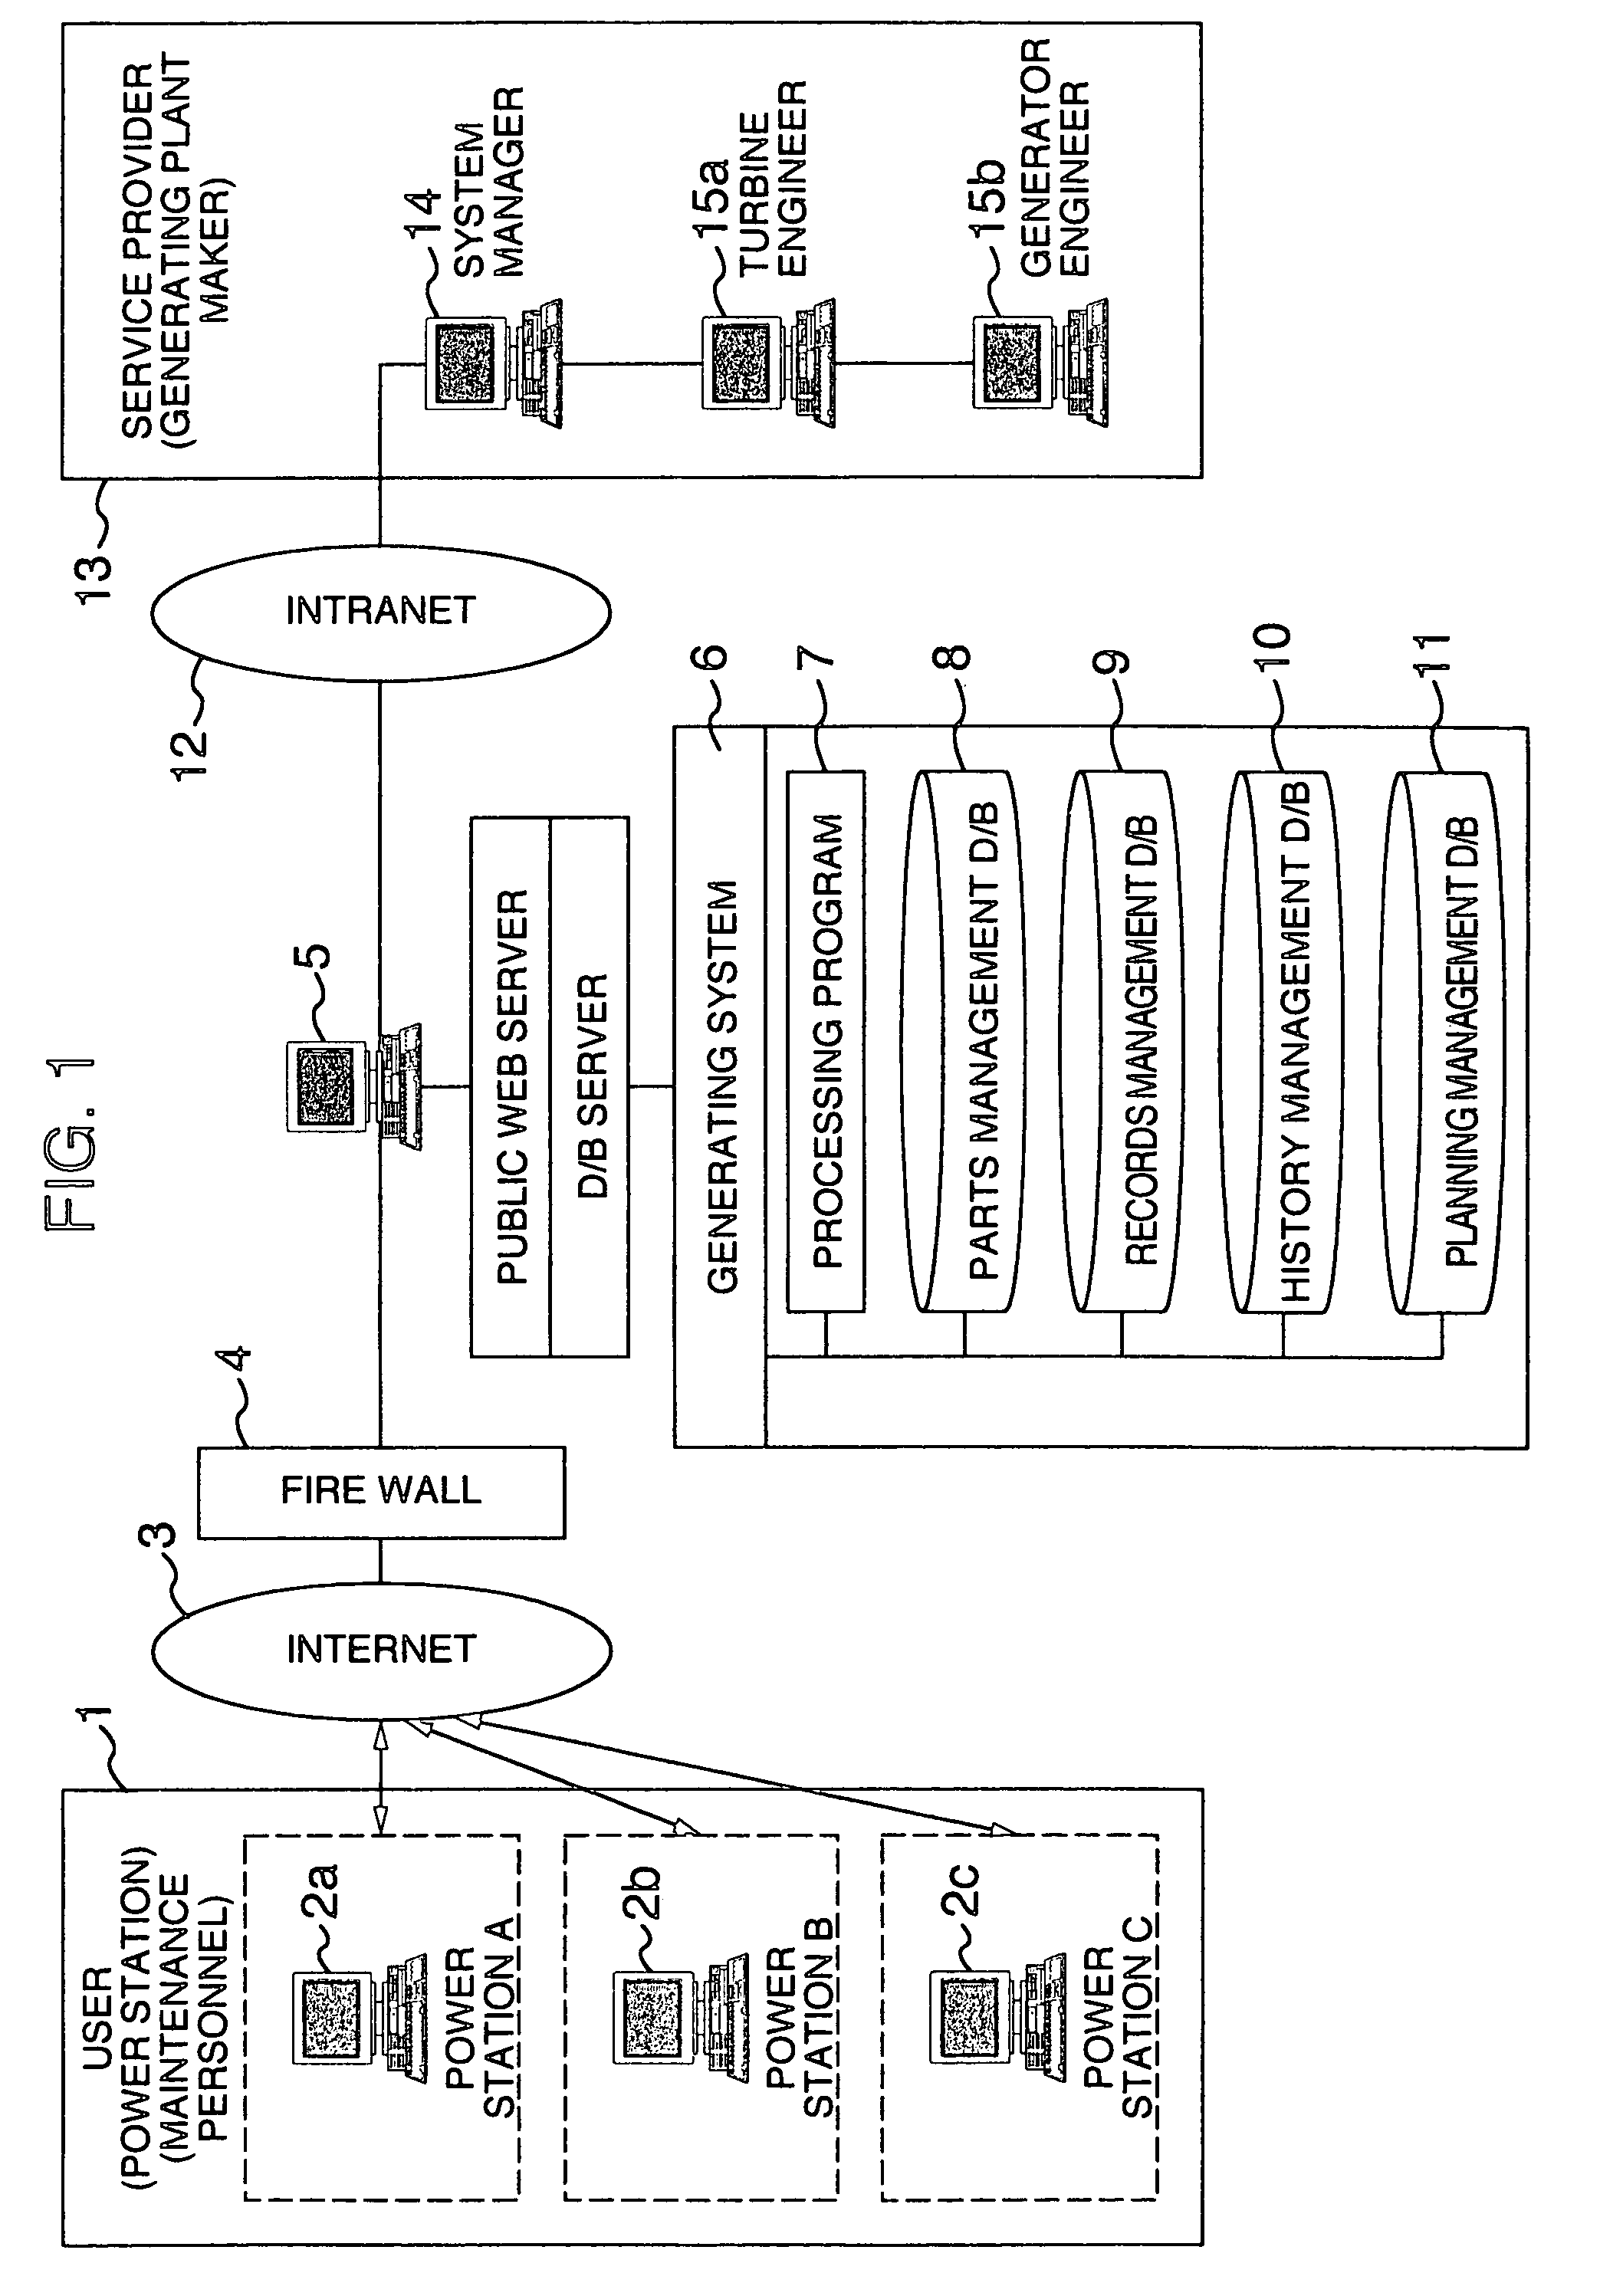 Maintenance information management system and method of providing a maintenance plan